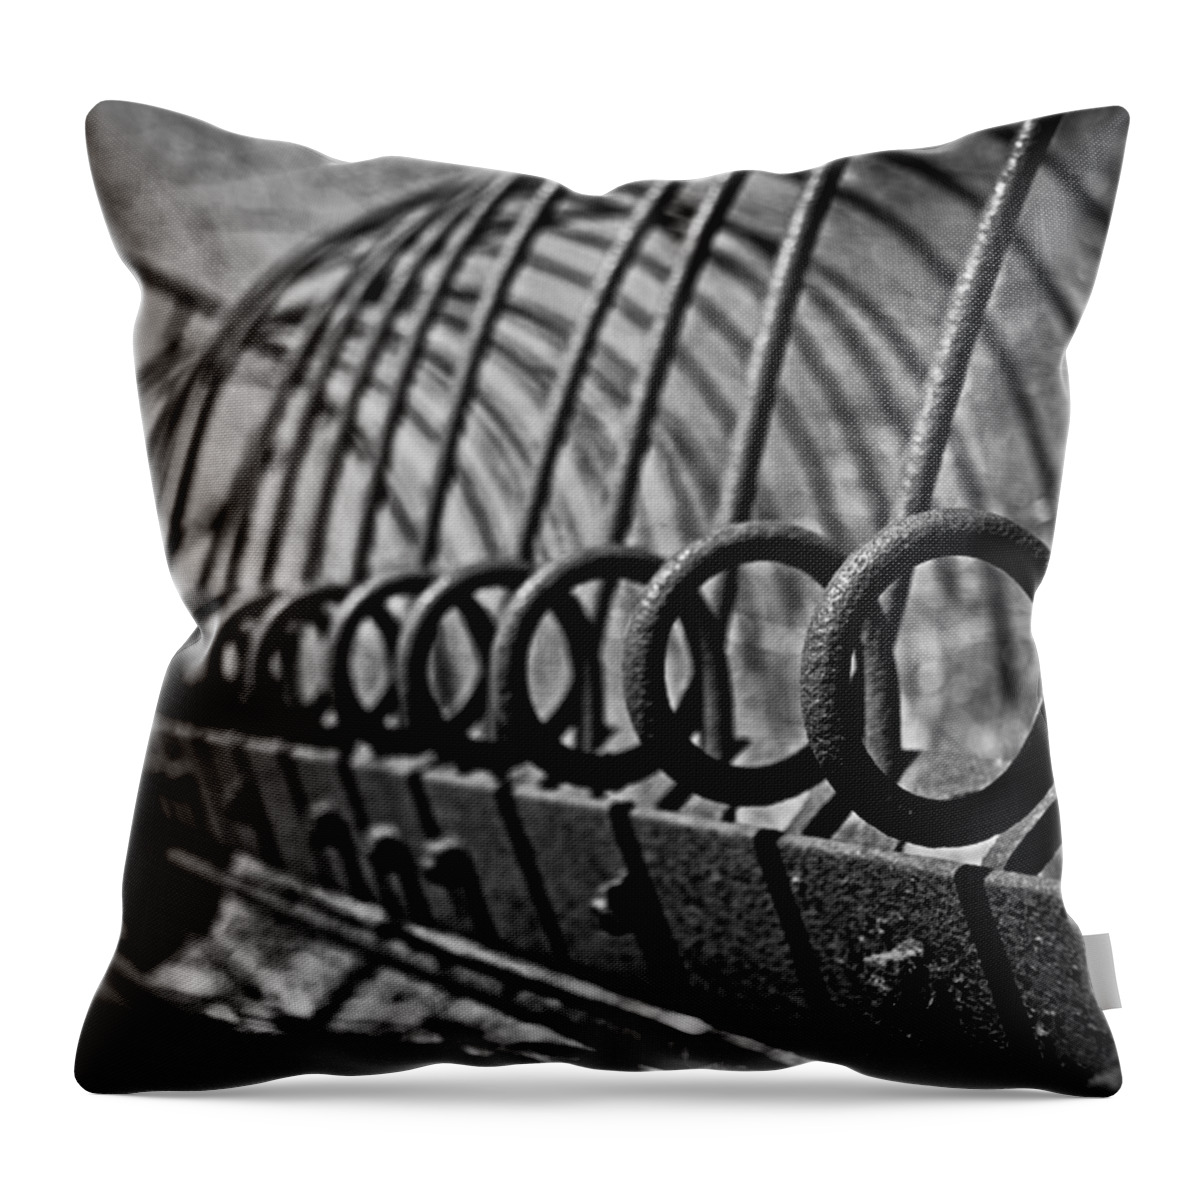 Up Close Throw Pillow featuring the photograph Rusty Old Hay Rake by Alana Ranney